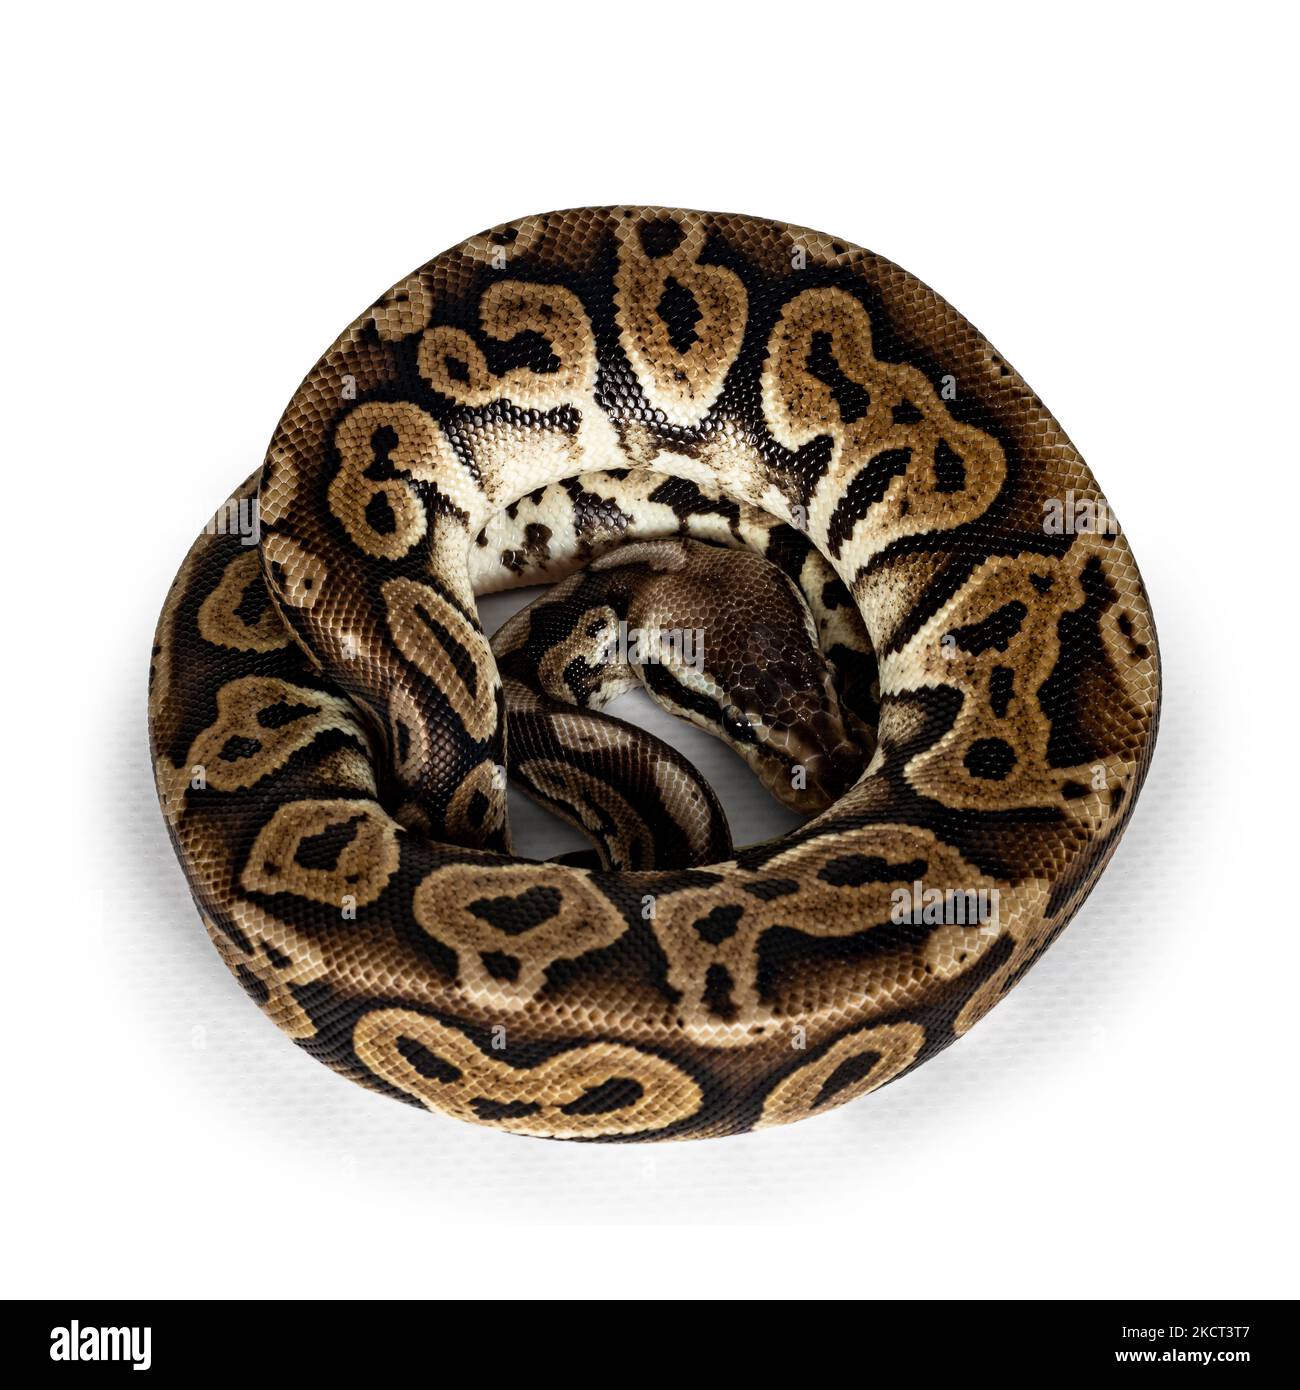 Top view curled up Ballpython aka Python regius, isolated on white background. Stock Photo